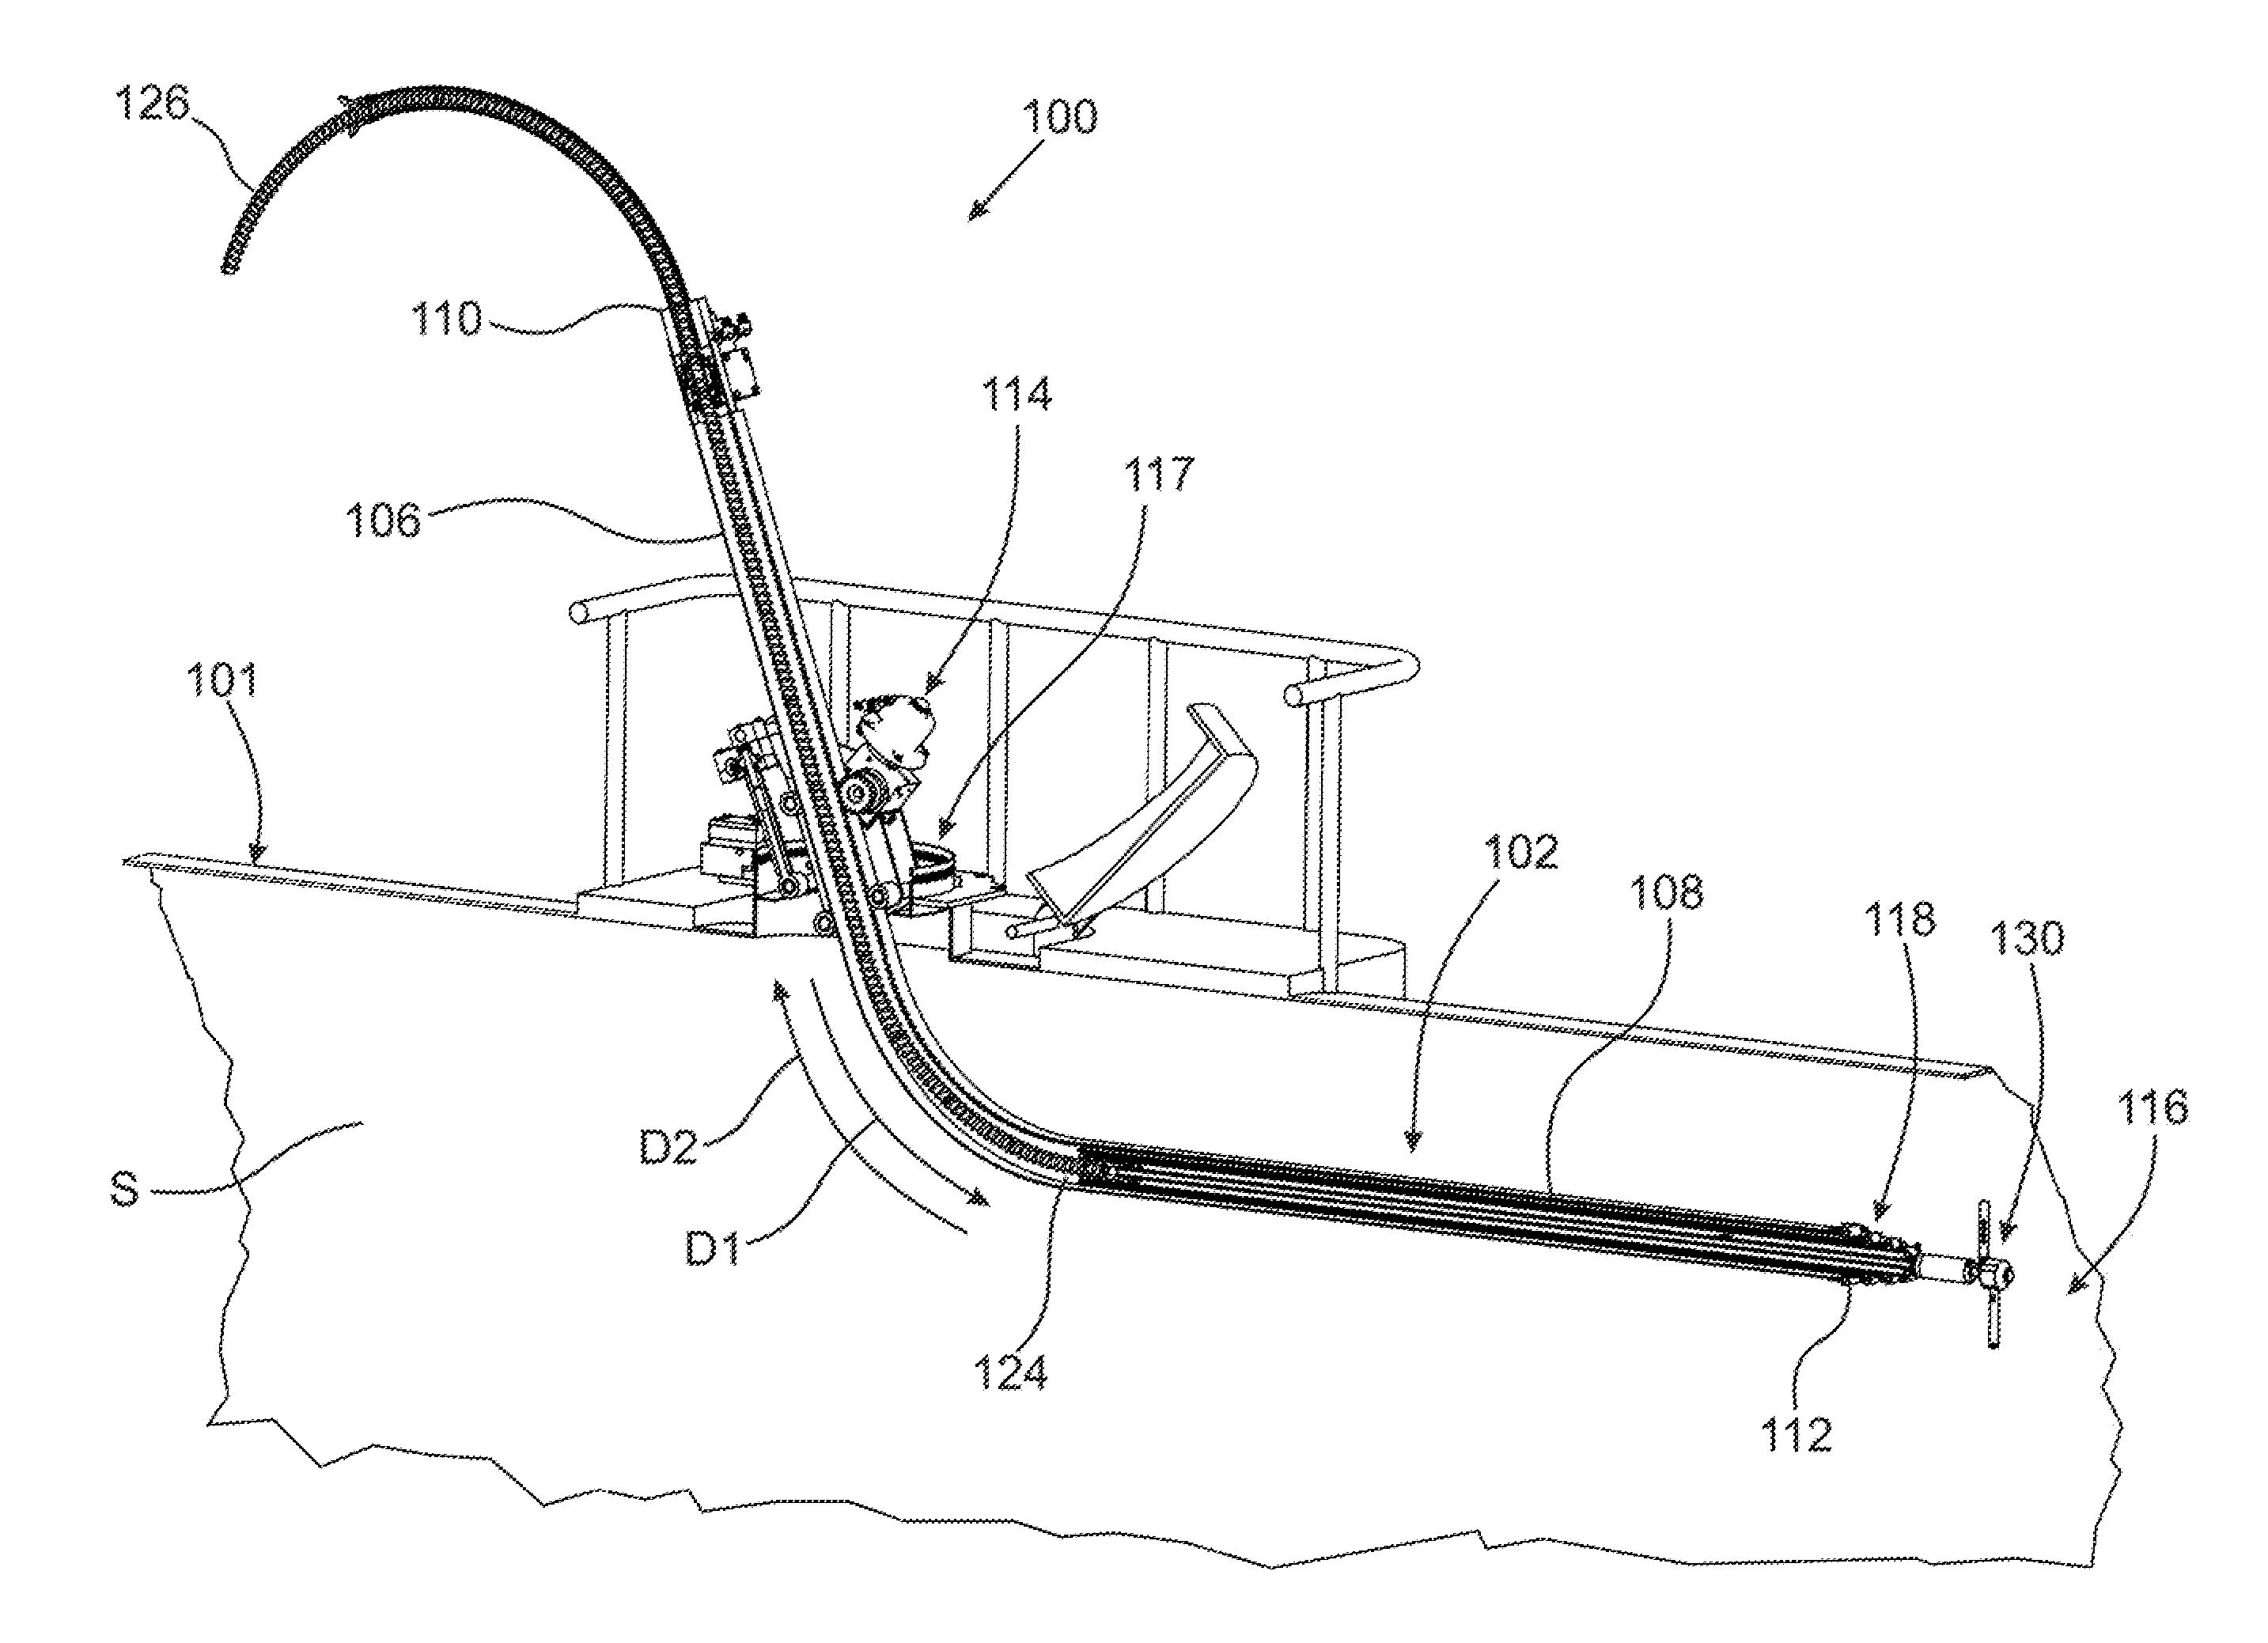 Apparatus for insertion in a tank and method thereof